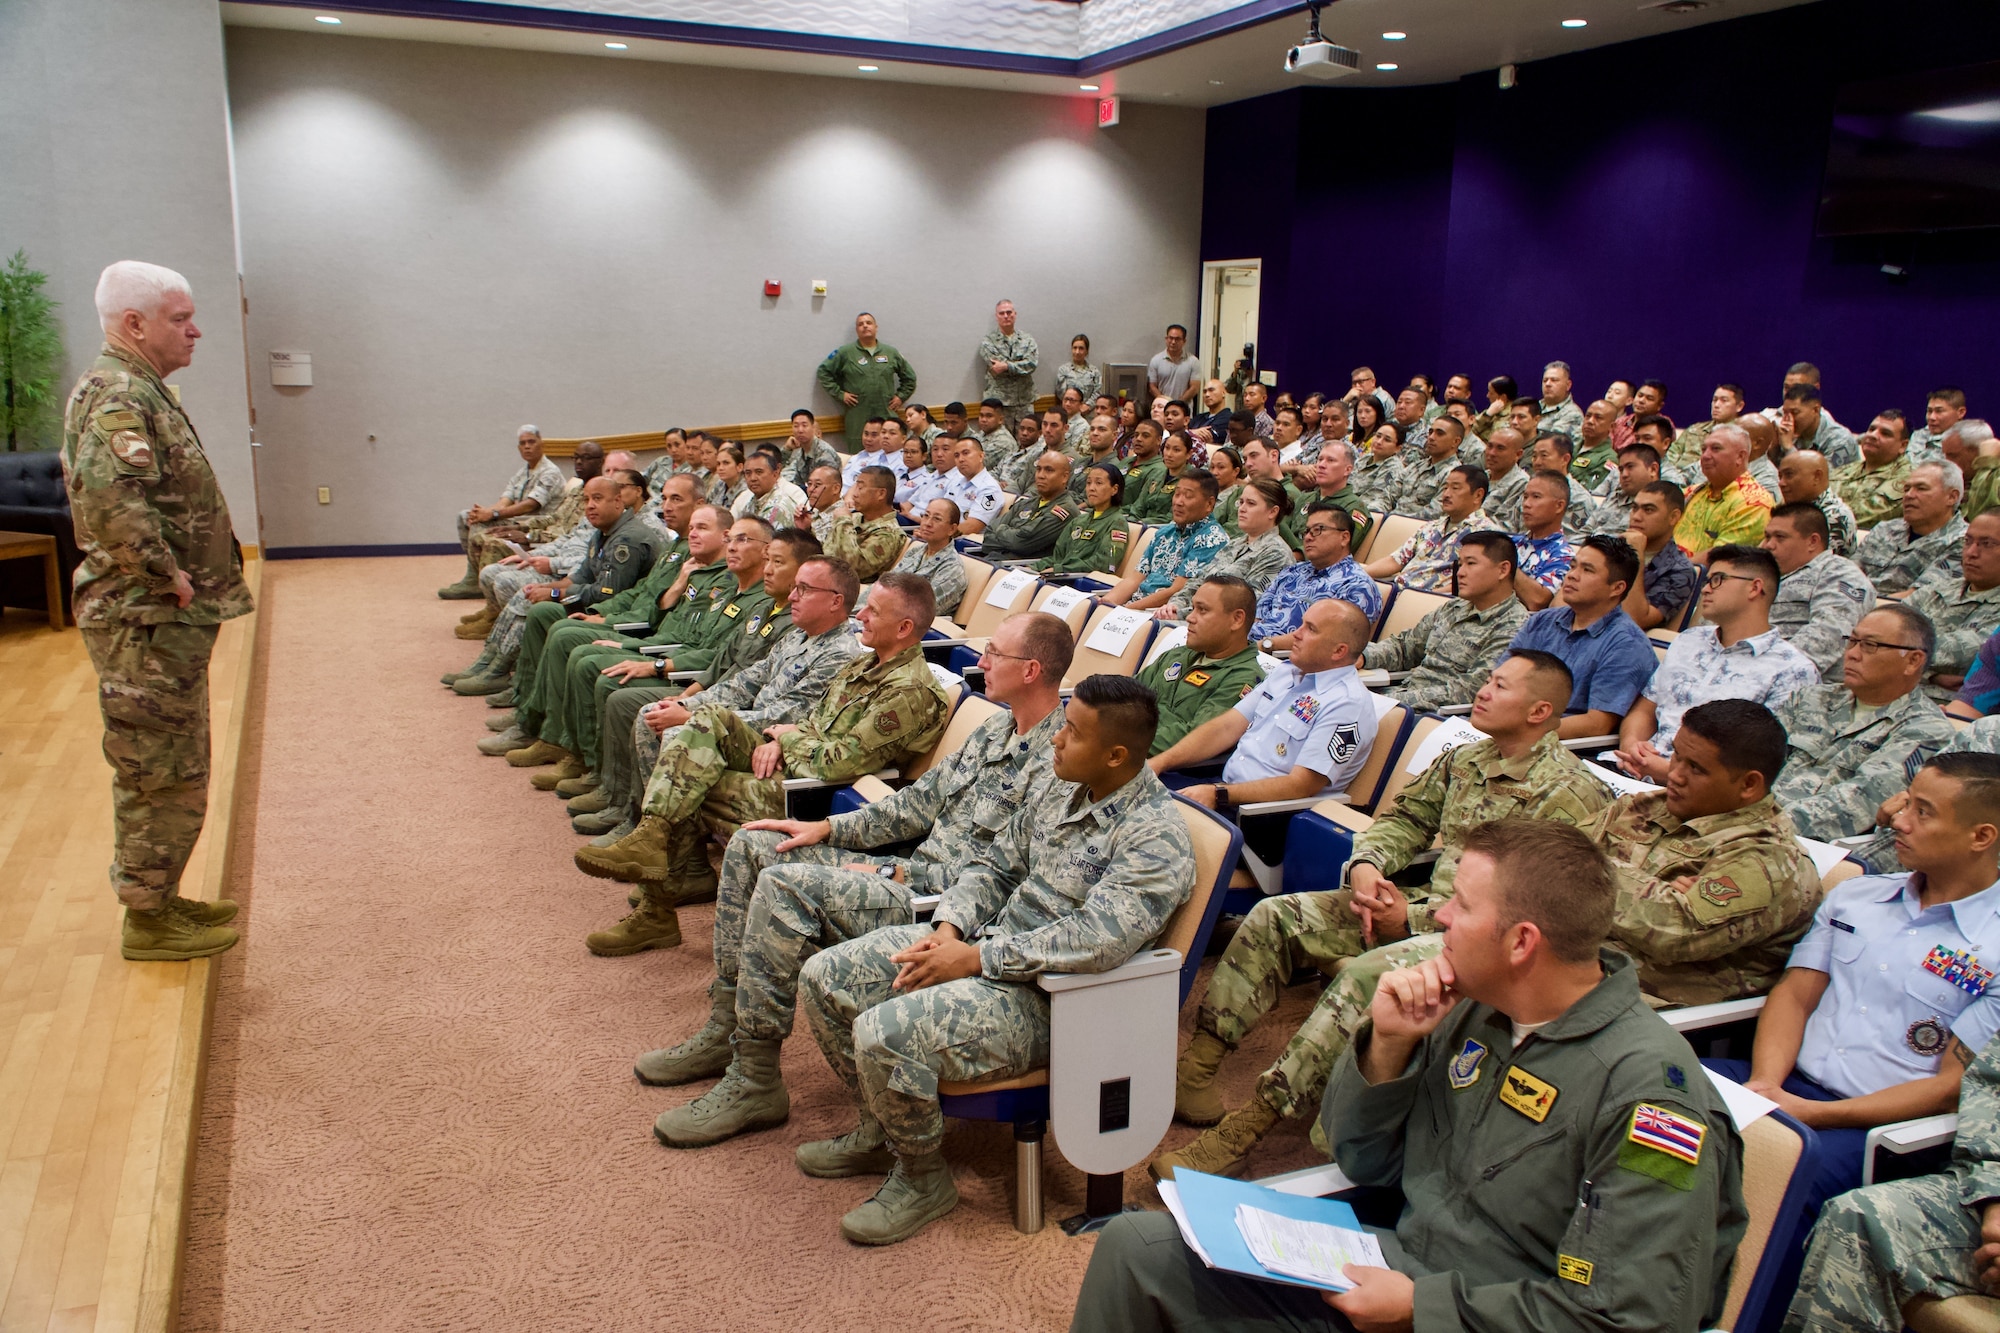 Lt. Gen. L. Scott Rice, Director of the Air National Guard, addresses members of the 154th Wing of the Hawaii Air National Guard at a town hall meeting during his two day visit on June 21, 2019 at Joint Base Pearl Harbor-Hickam.